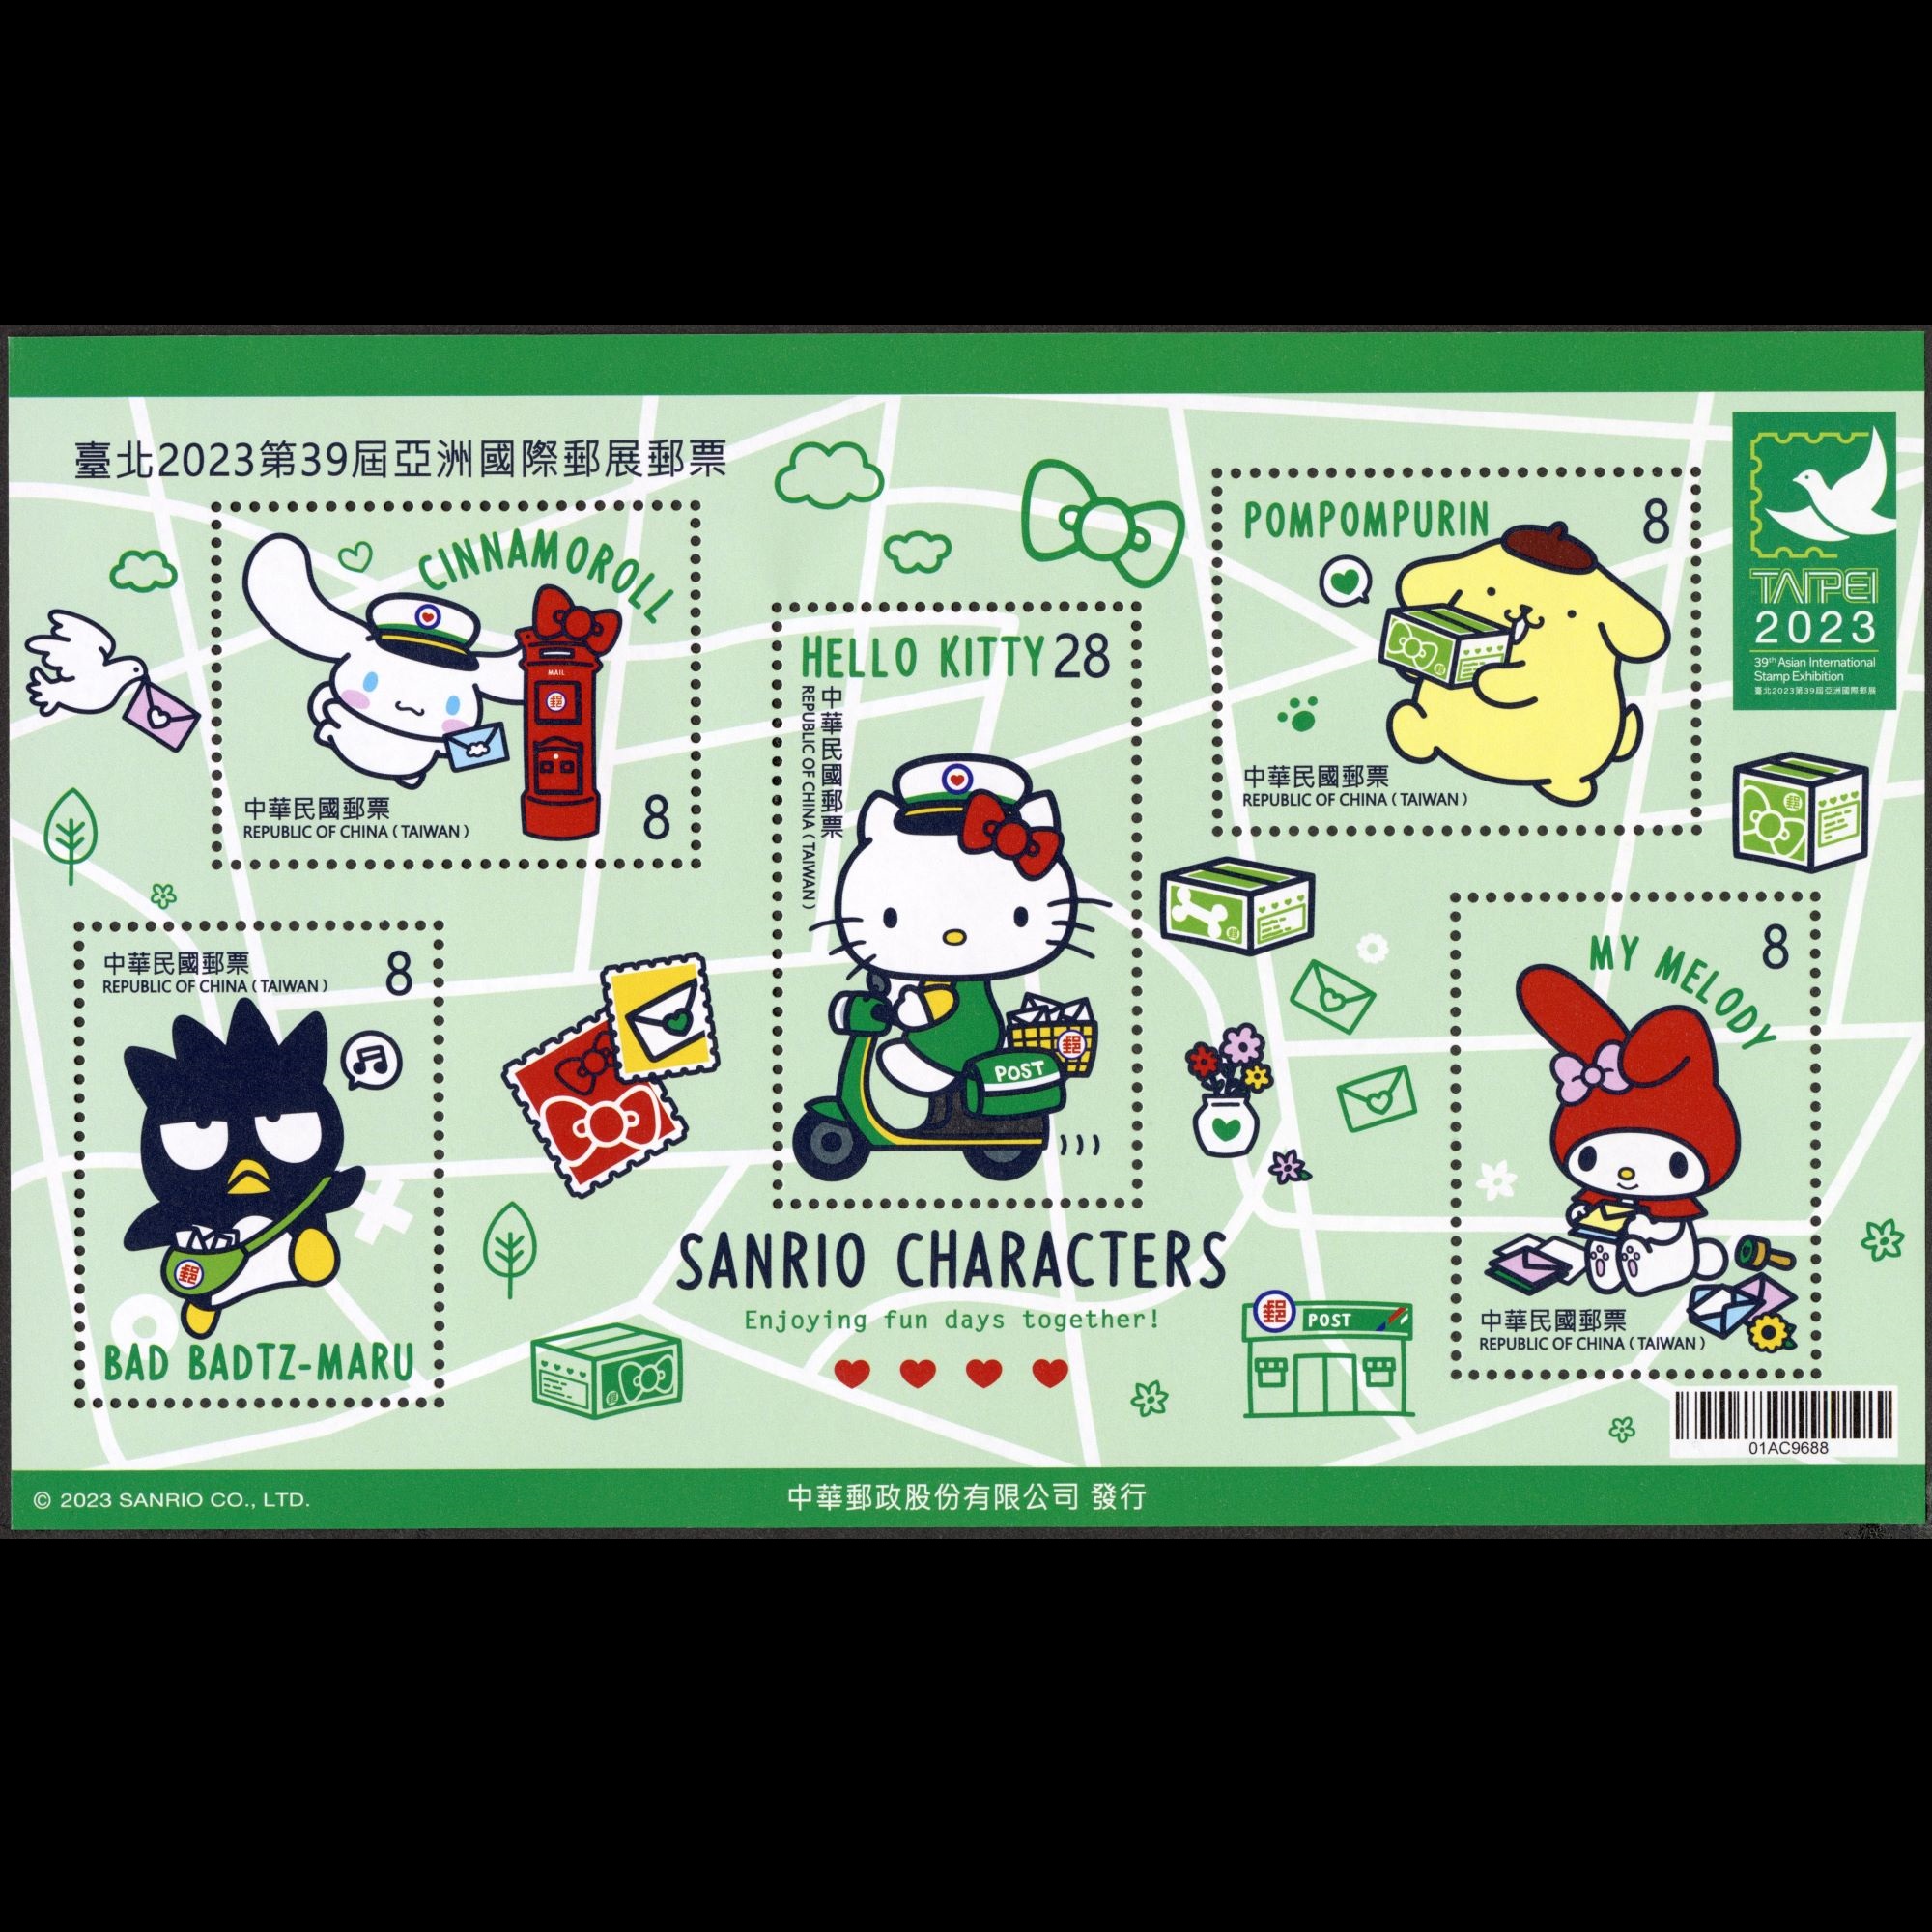 (Sp.739.1)Sp.739 TAIPEI 2023 – 39th Asian International Stamp Exhibition Souvenir Sheets: SANRIO CHARACTERS